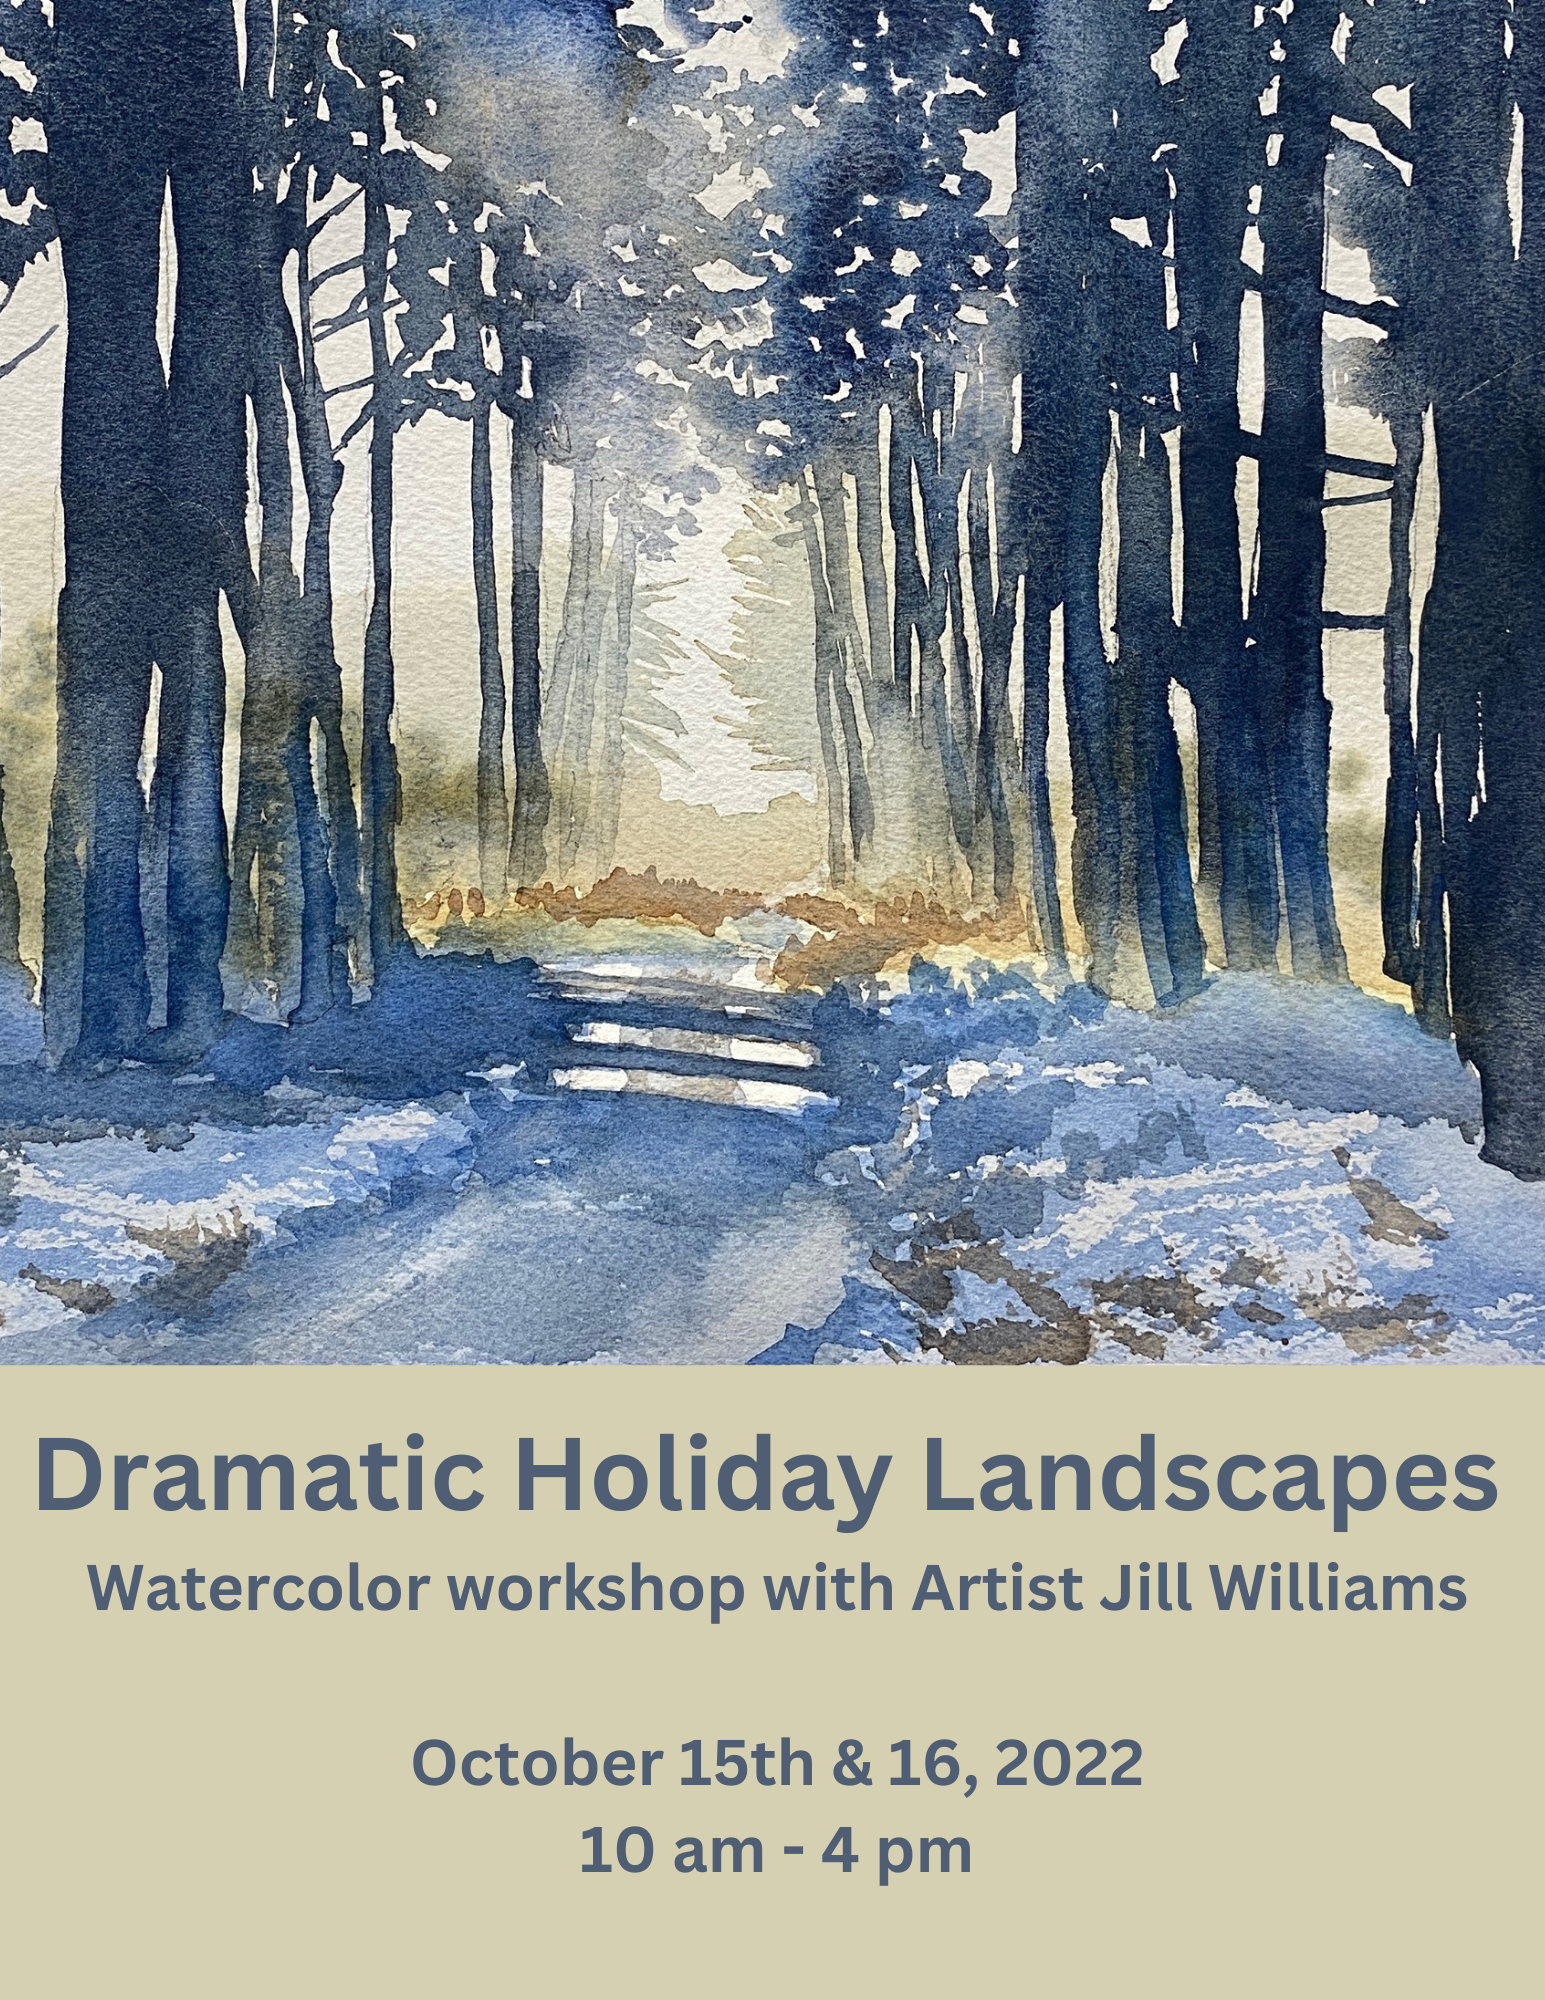 Dramatic Holiday Landscapes in Watercolor workshop with Jill Williams